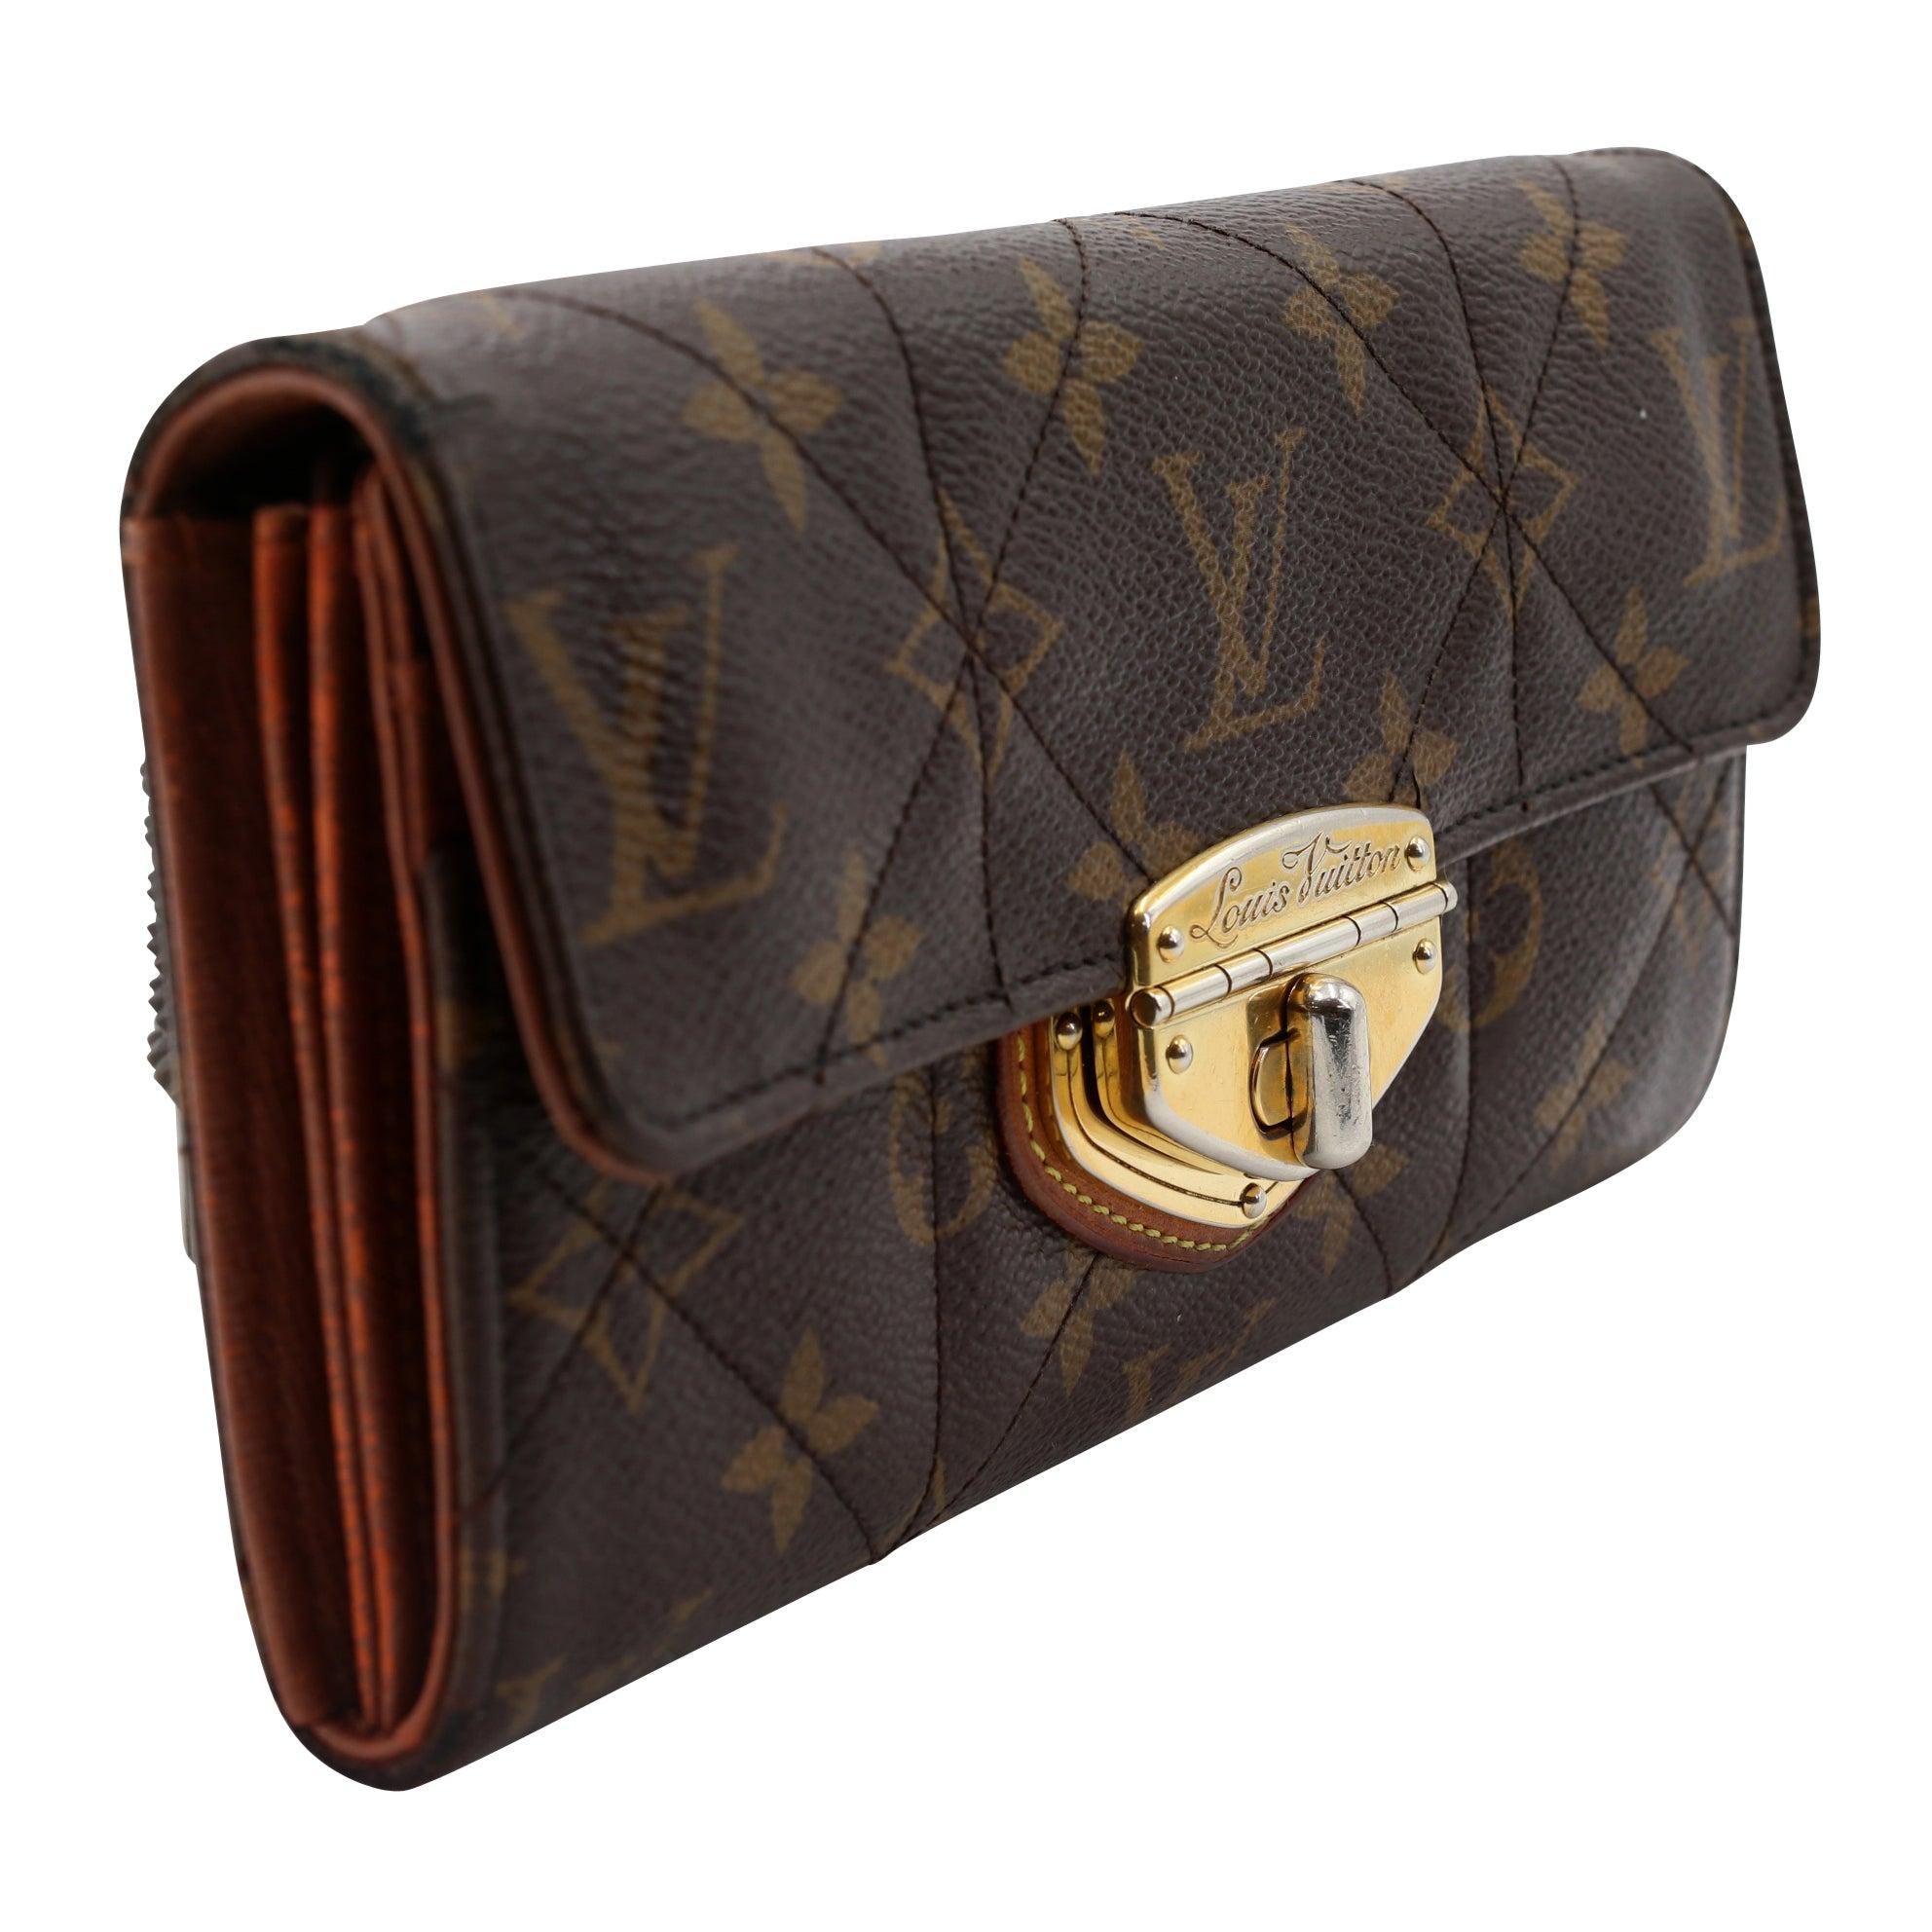 The Louis Vuitton Etoile wallet is perfect if you're seeking something sleek and compact with elegant gold detail. With many credit card slots and bill compartment, it will be the only wallet you will want to take with you everywhere. The exterior